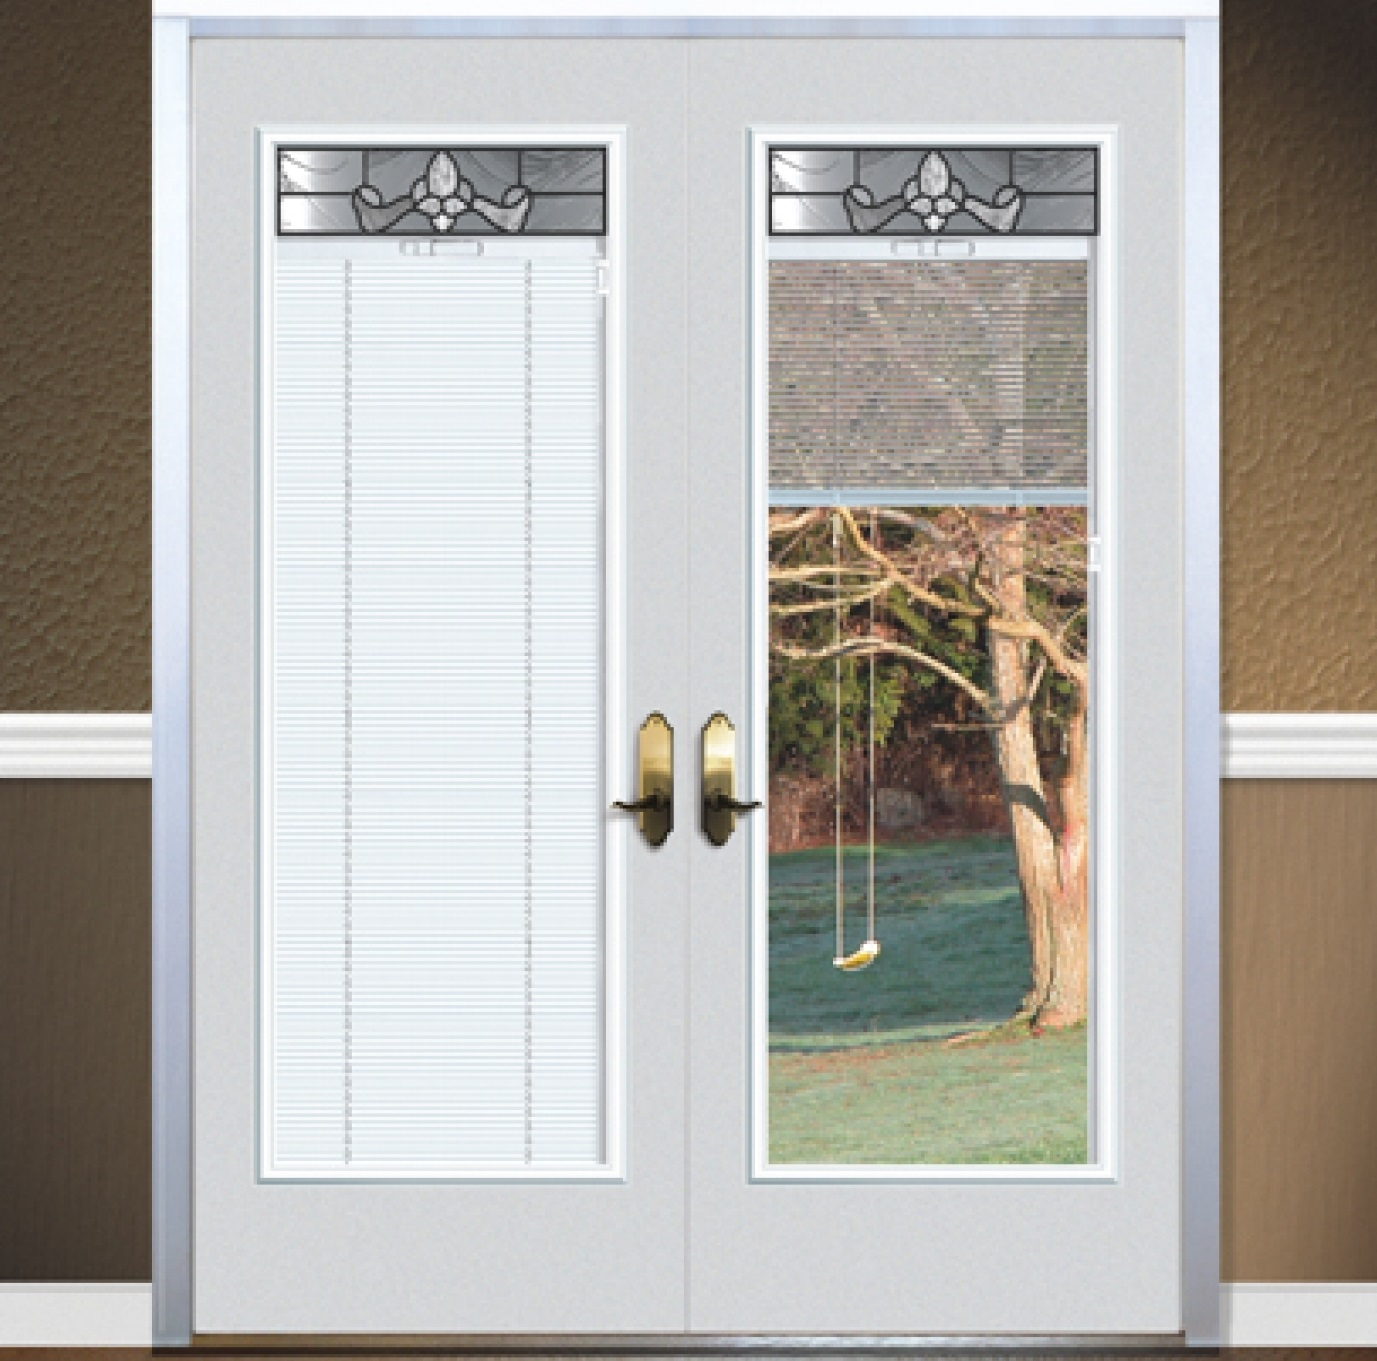 Patio Design Patio Doors With Internal Blinds For Best Access regarding sizing 1377 X 1361